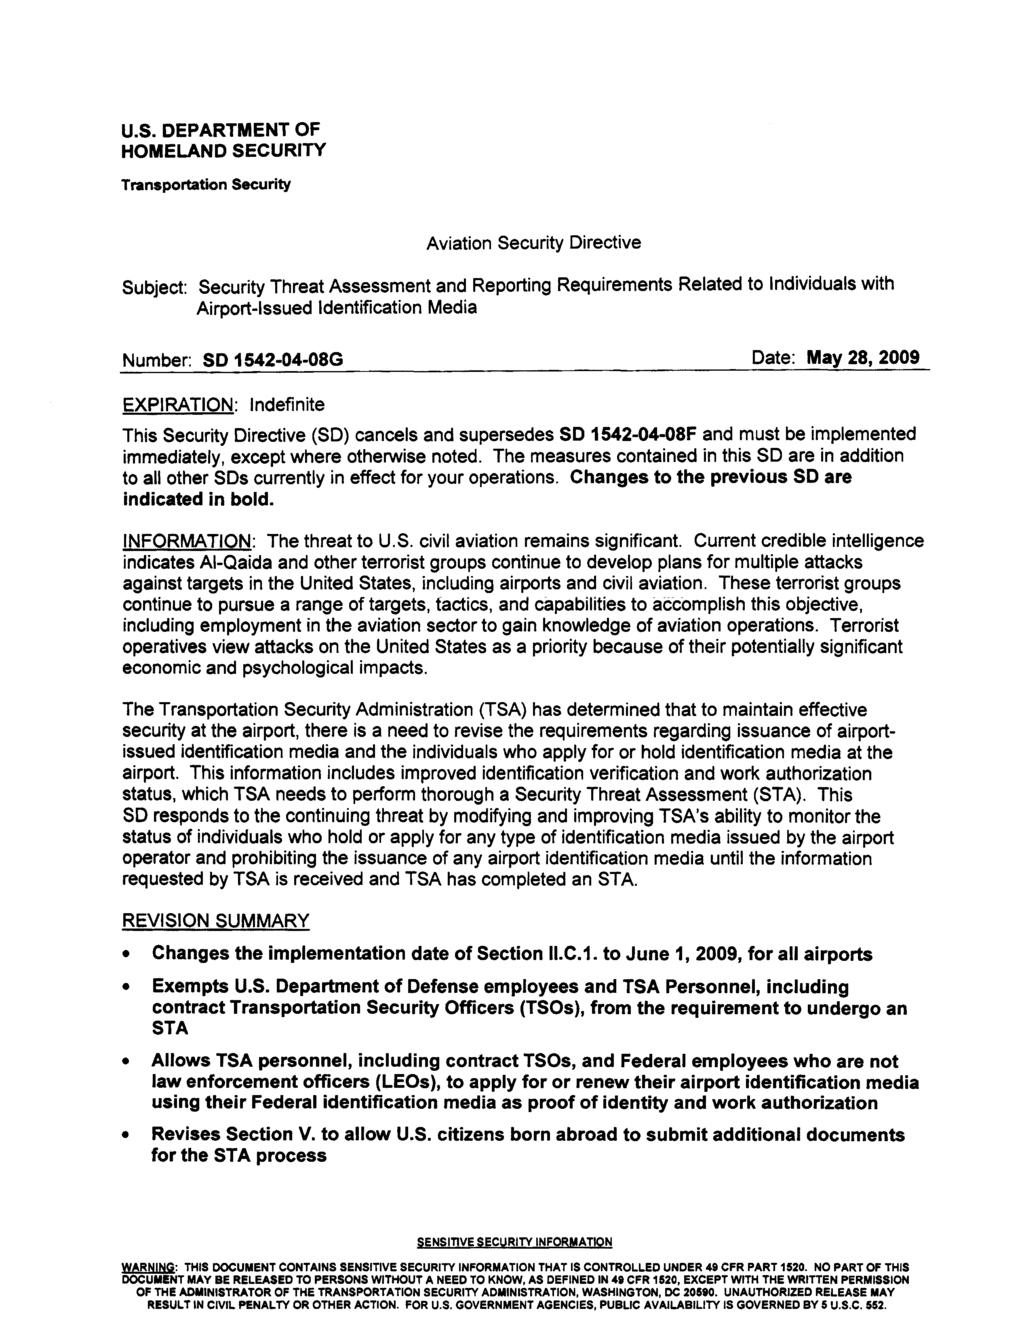 u.s. DEPARTMENT OF HOMELAND SECURITY Transportation Security Aviation Security Directive Subject: Security Threat Assessment and Reporting Requirements Related to Individuals with Airport-Issued